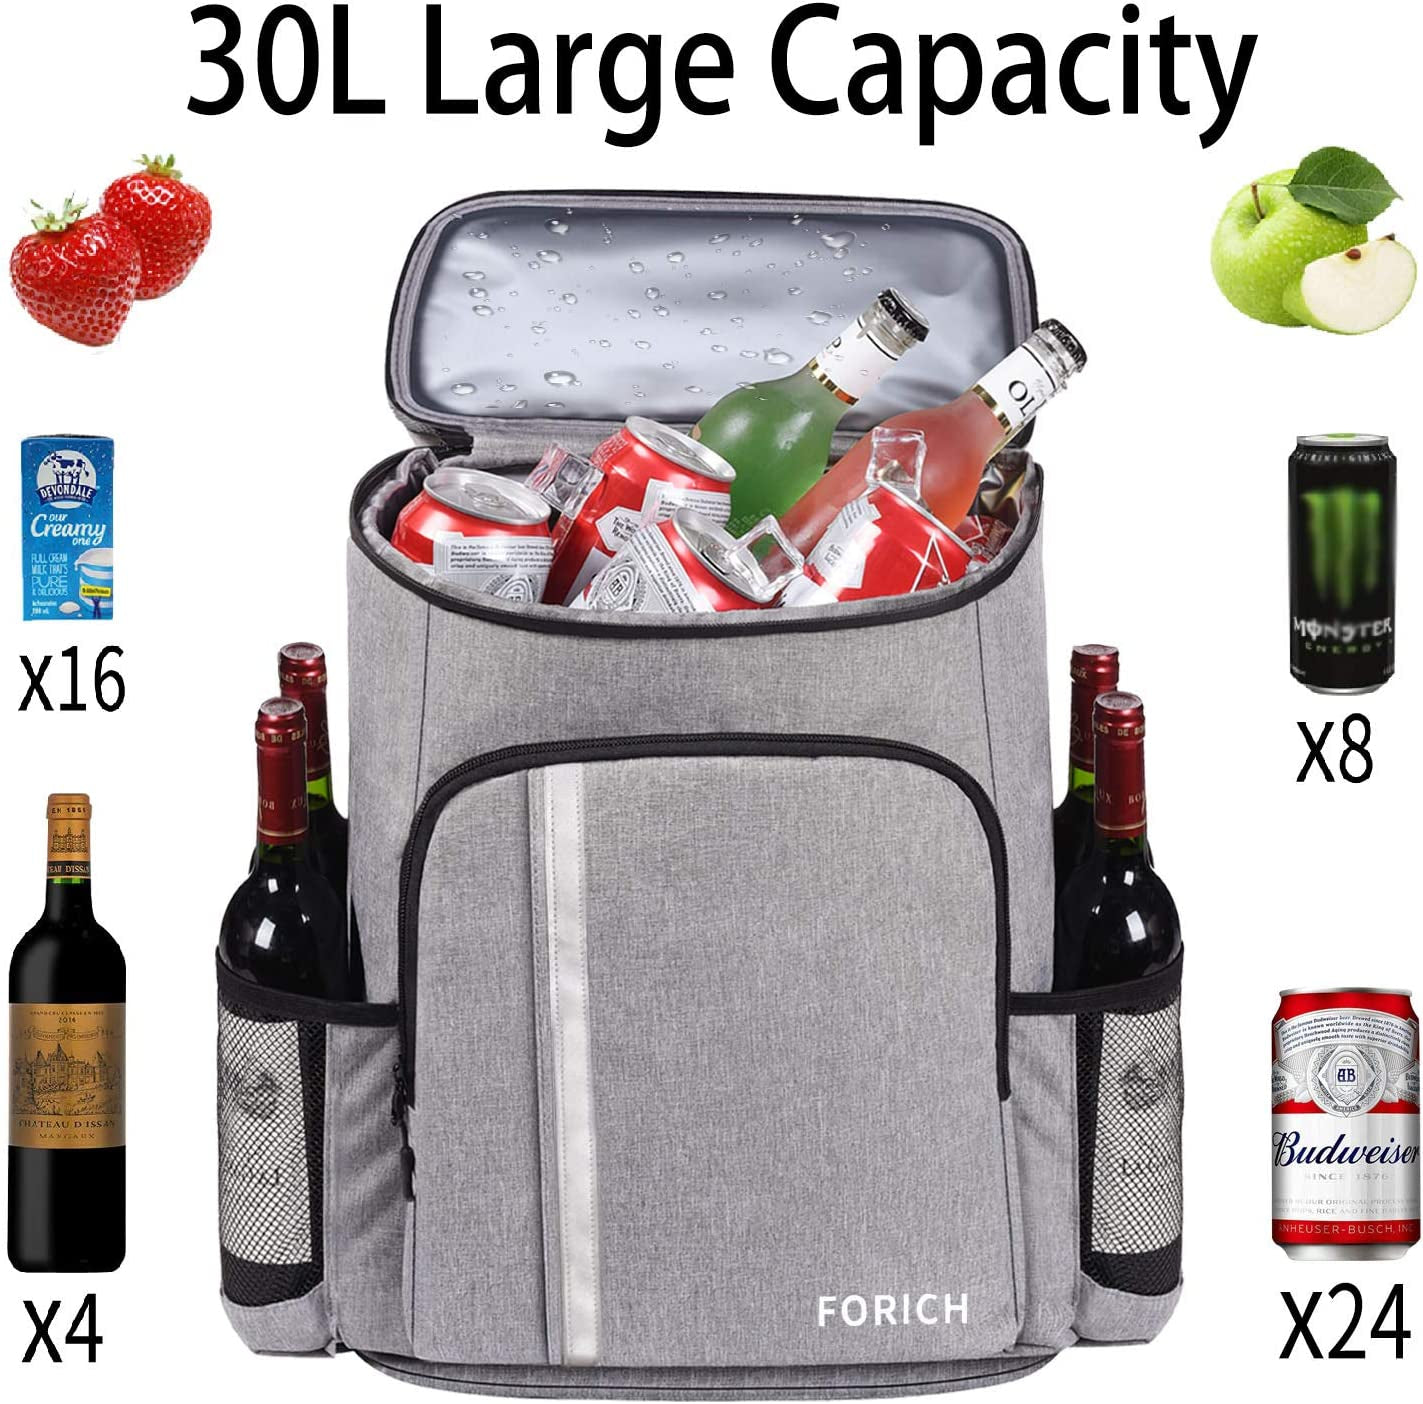 Backpack Cooler, Insulated, 30 Can Capacity - 62810BPCLR